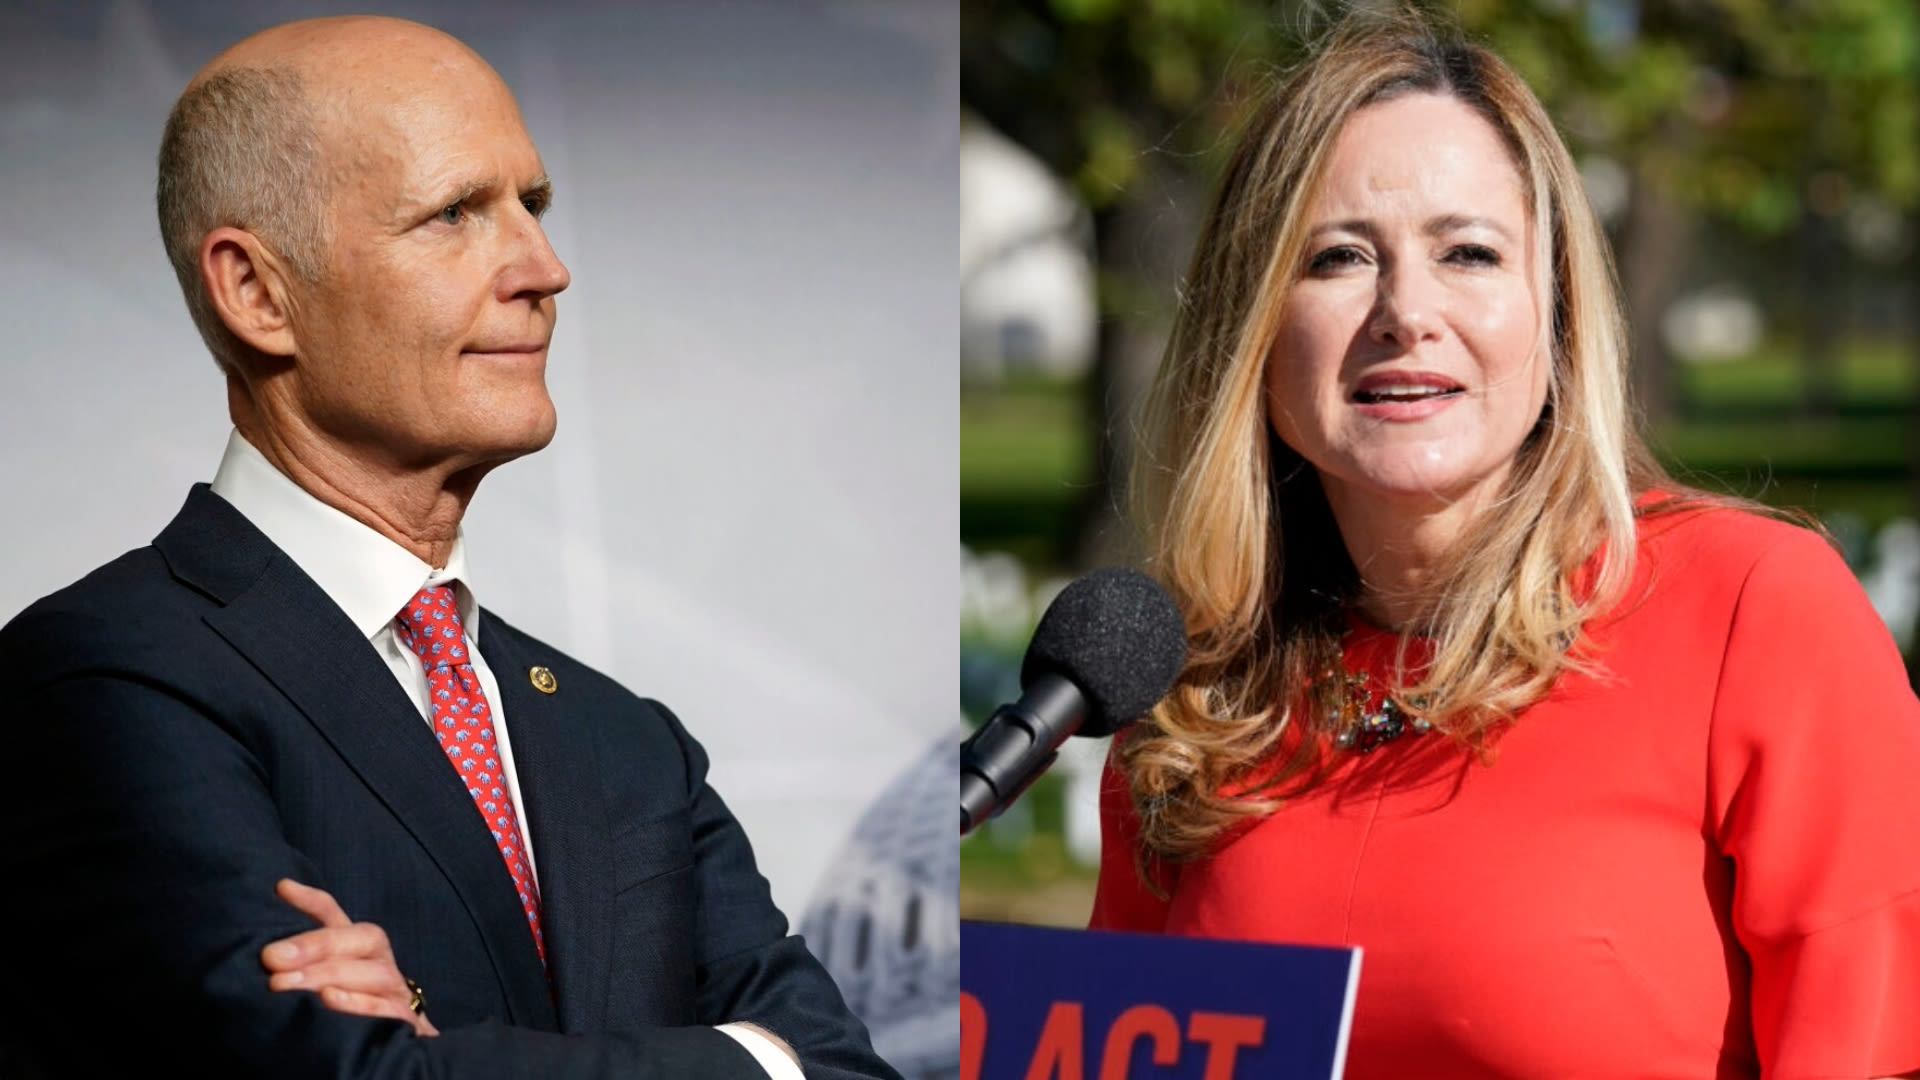 Poll: Rick Scott opens up 15-point lead over likely Democratic opponent